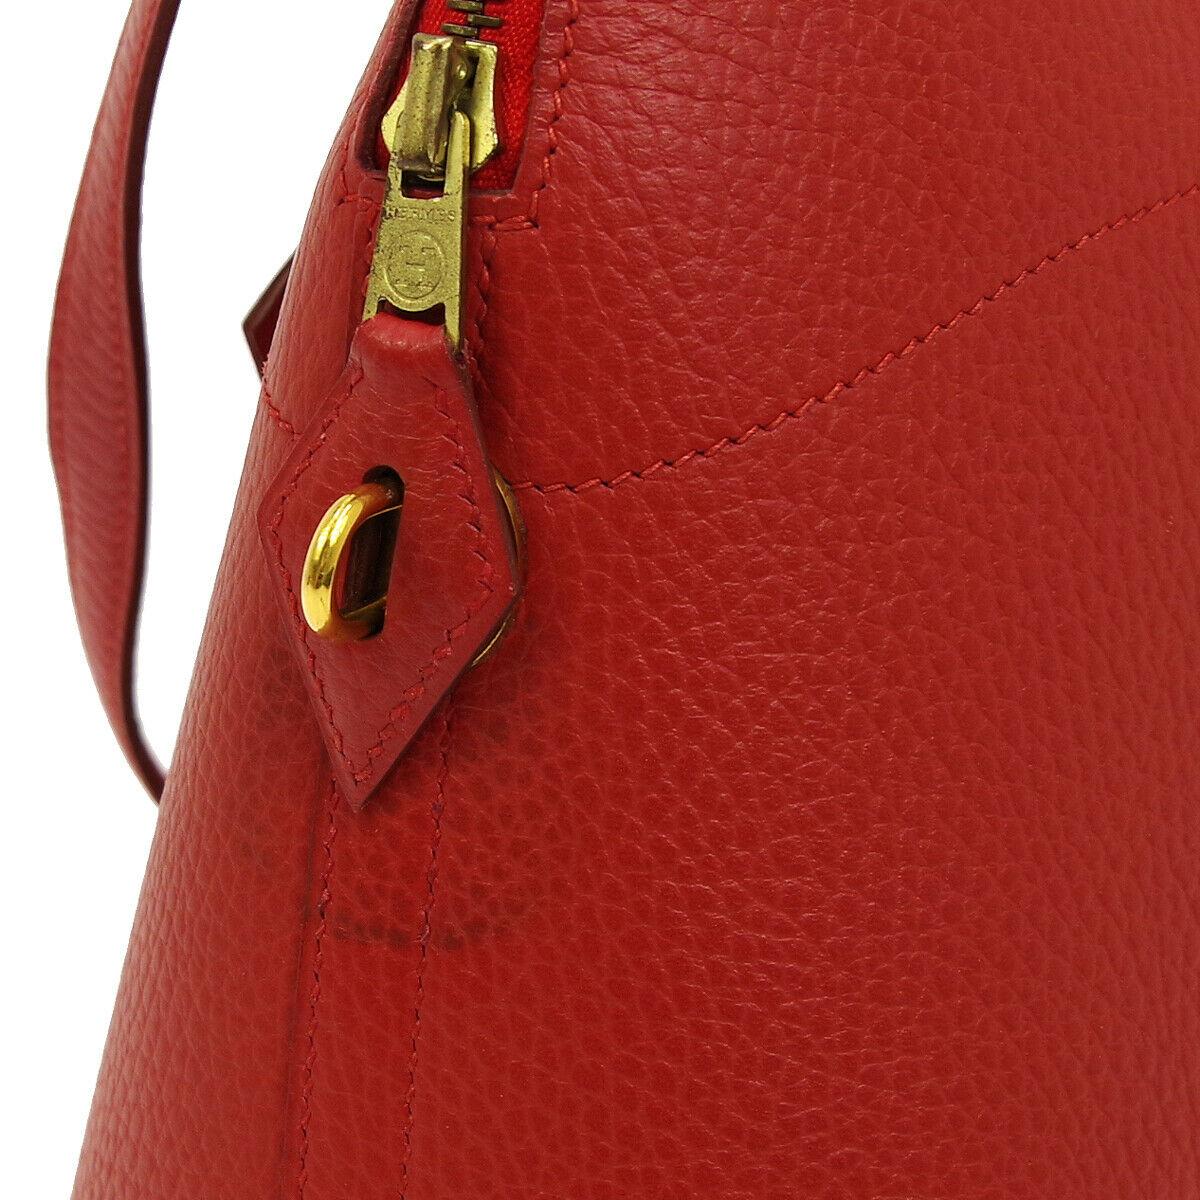 Hermes Red Leather Bolide Gold Top Handle Satchel Carryall Travel Shoulder Tote Bag

Leather
Gold tone hardware
Zipper closure
Date code present
Made in France
Handle drop 4